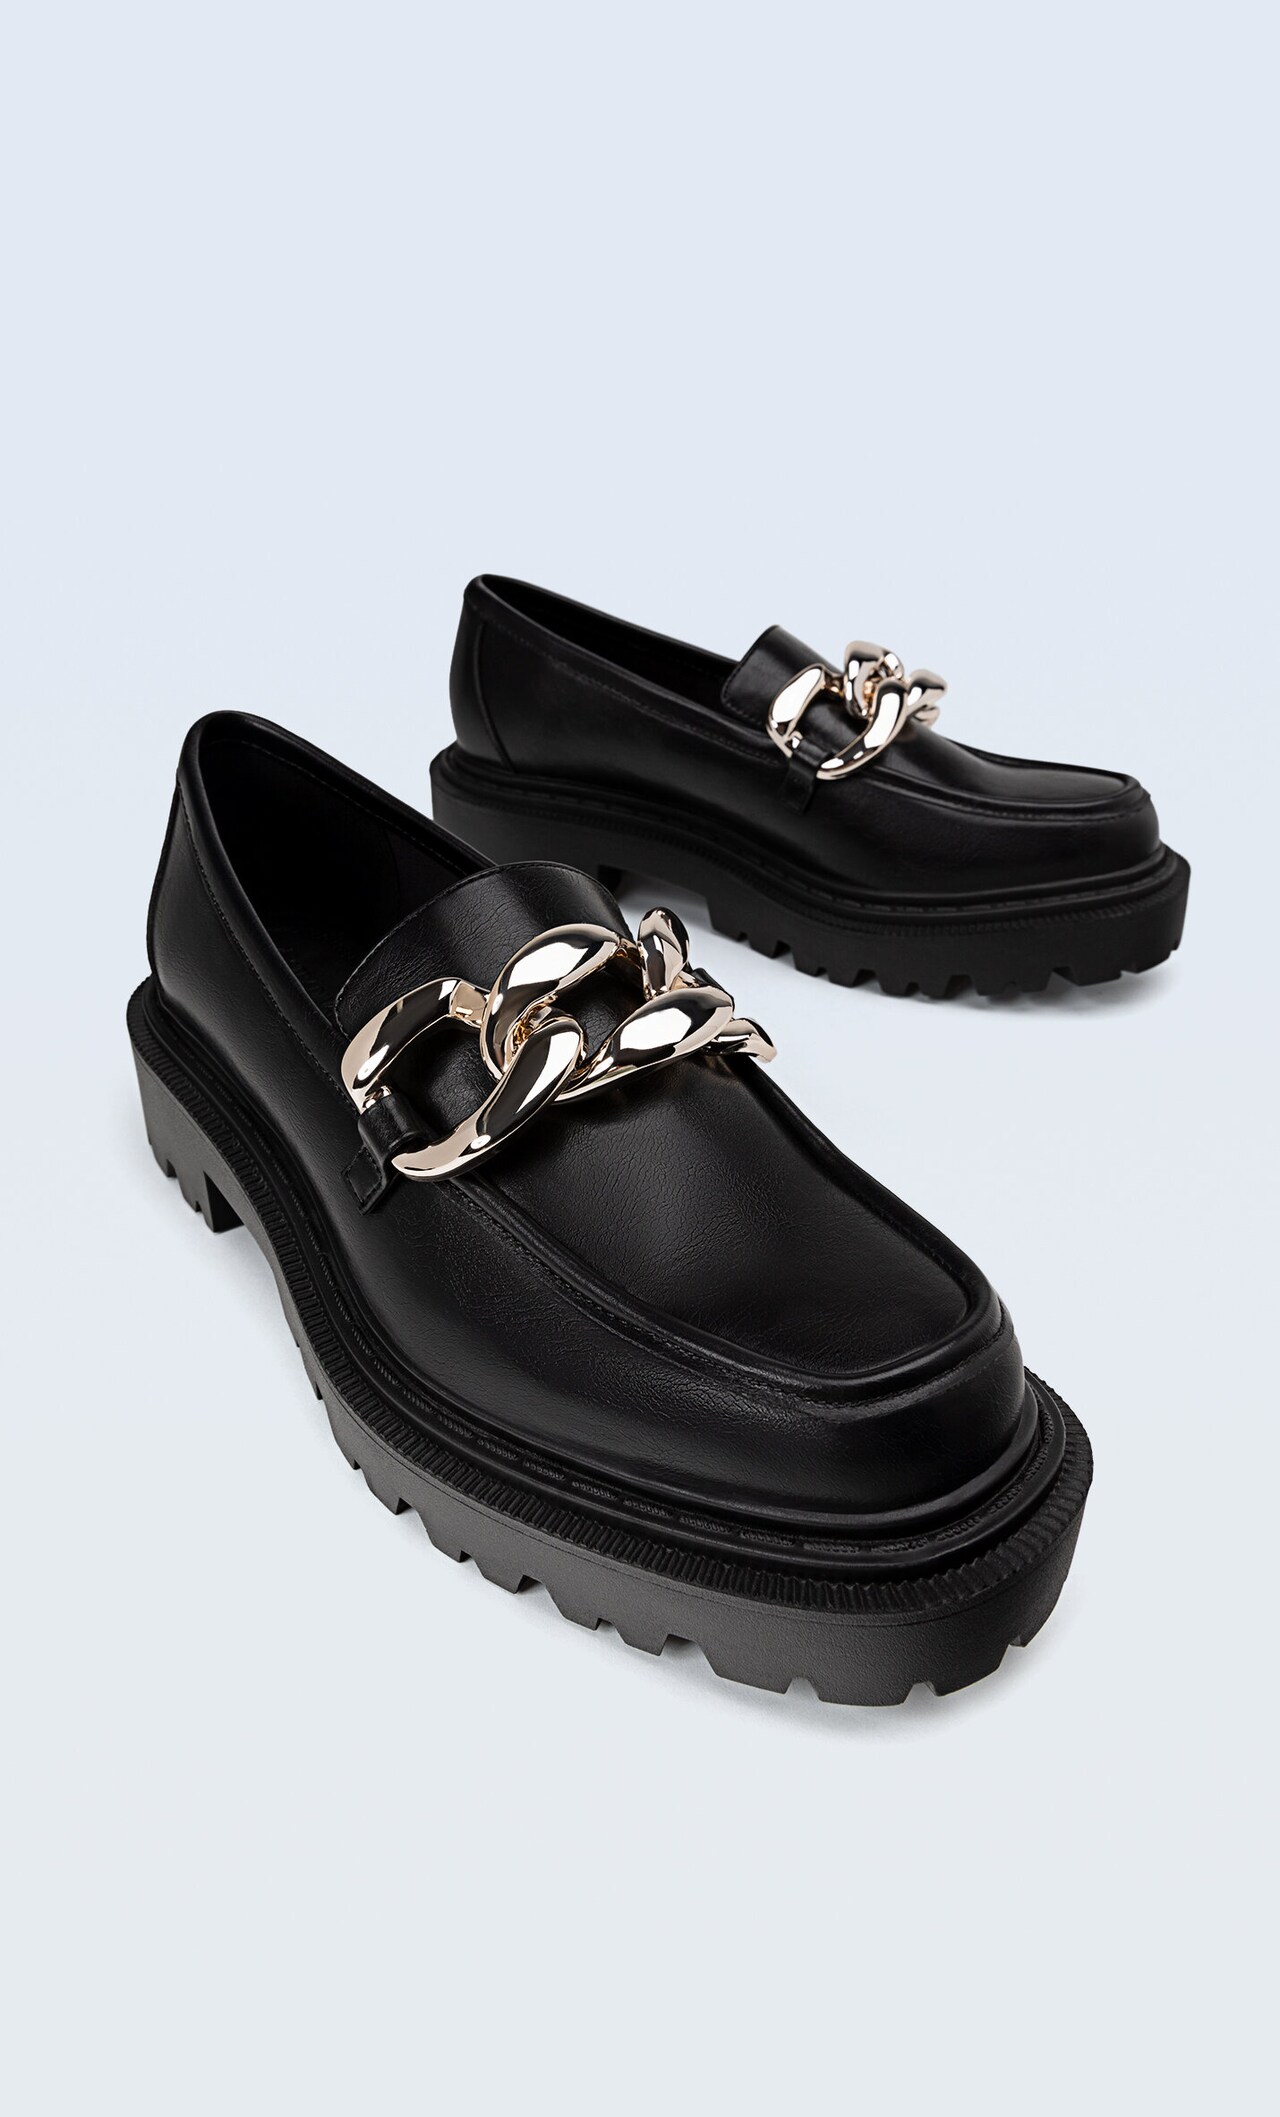 Loafers with chain detail - Women's fashion | Stradivarius United